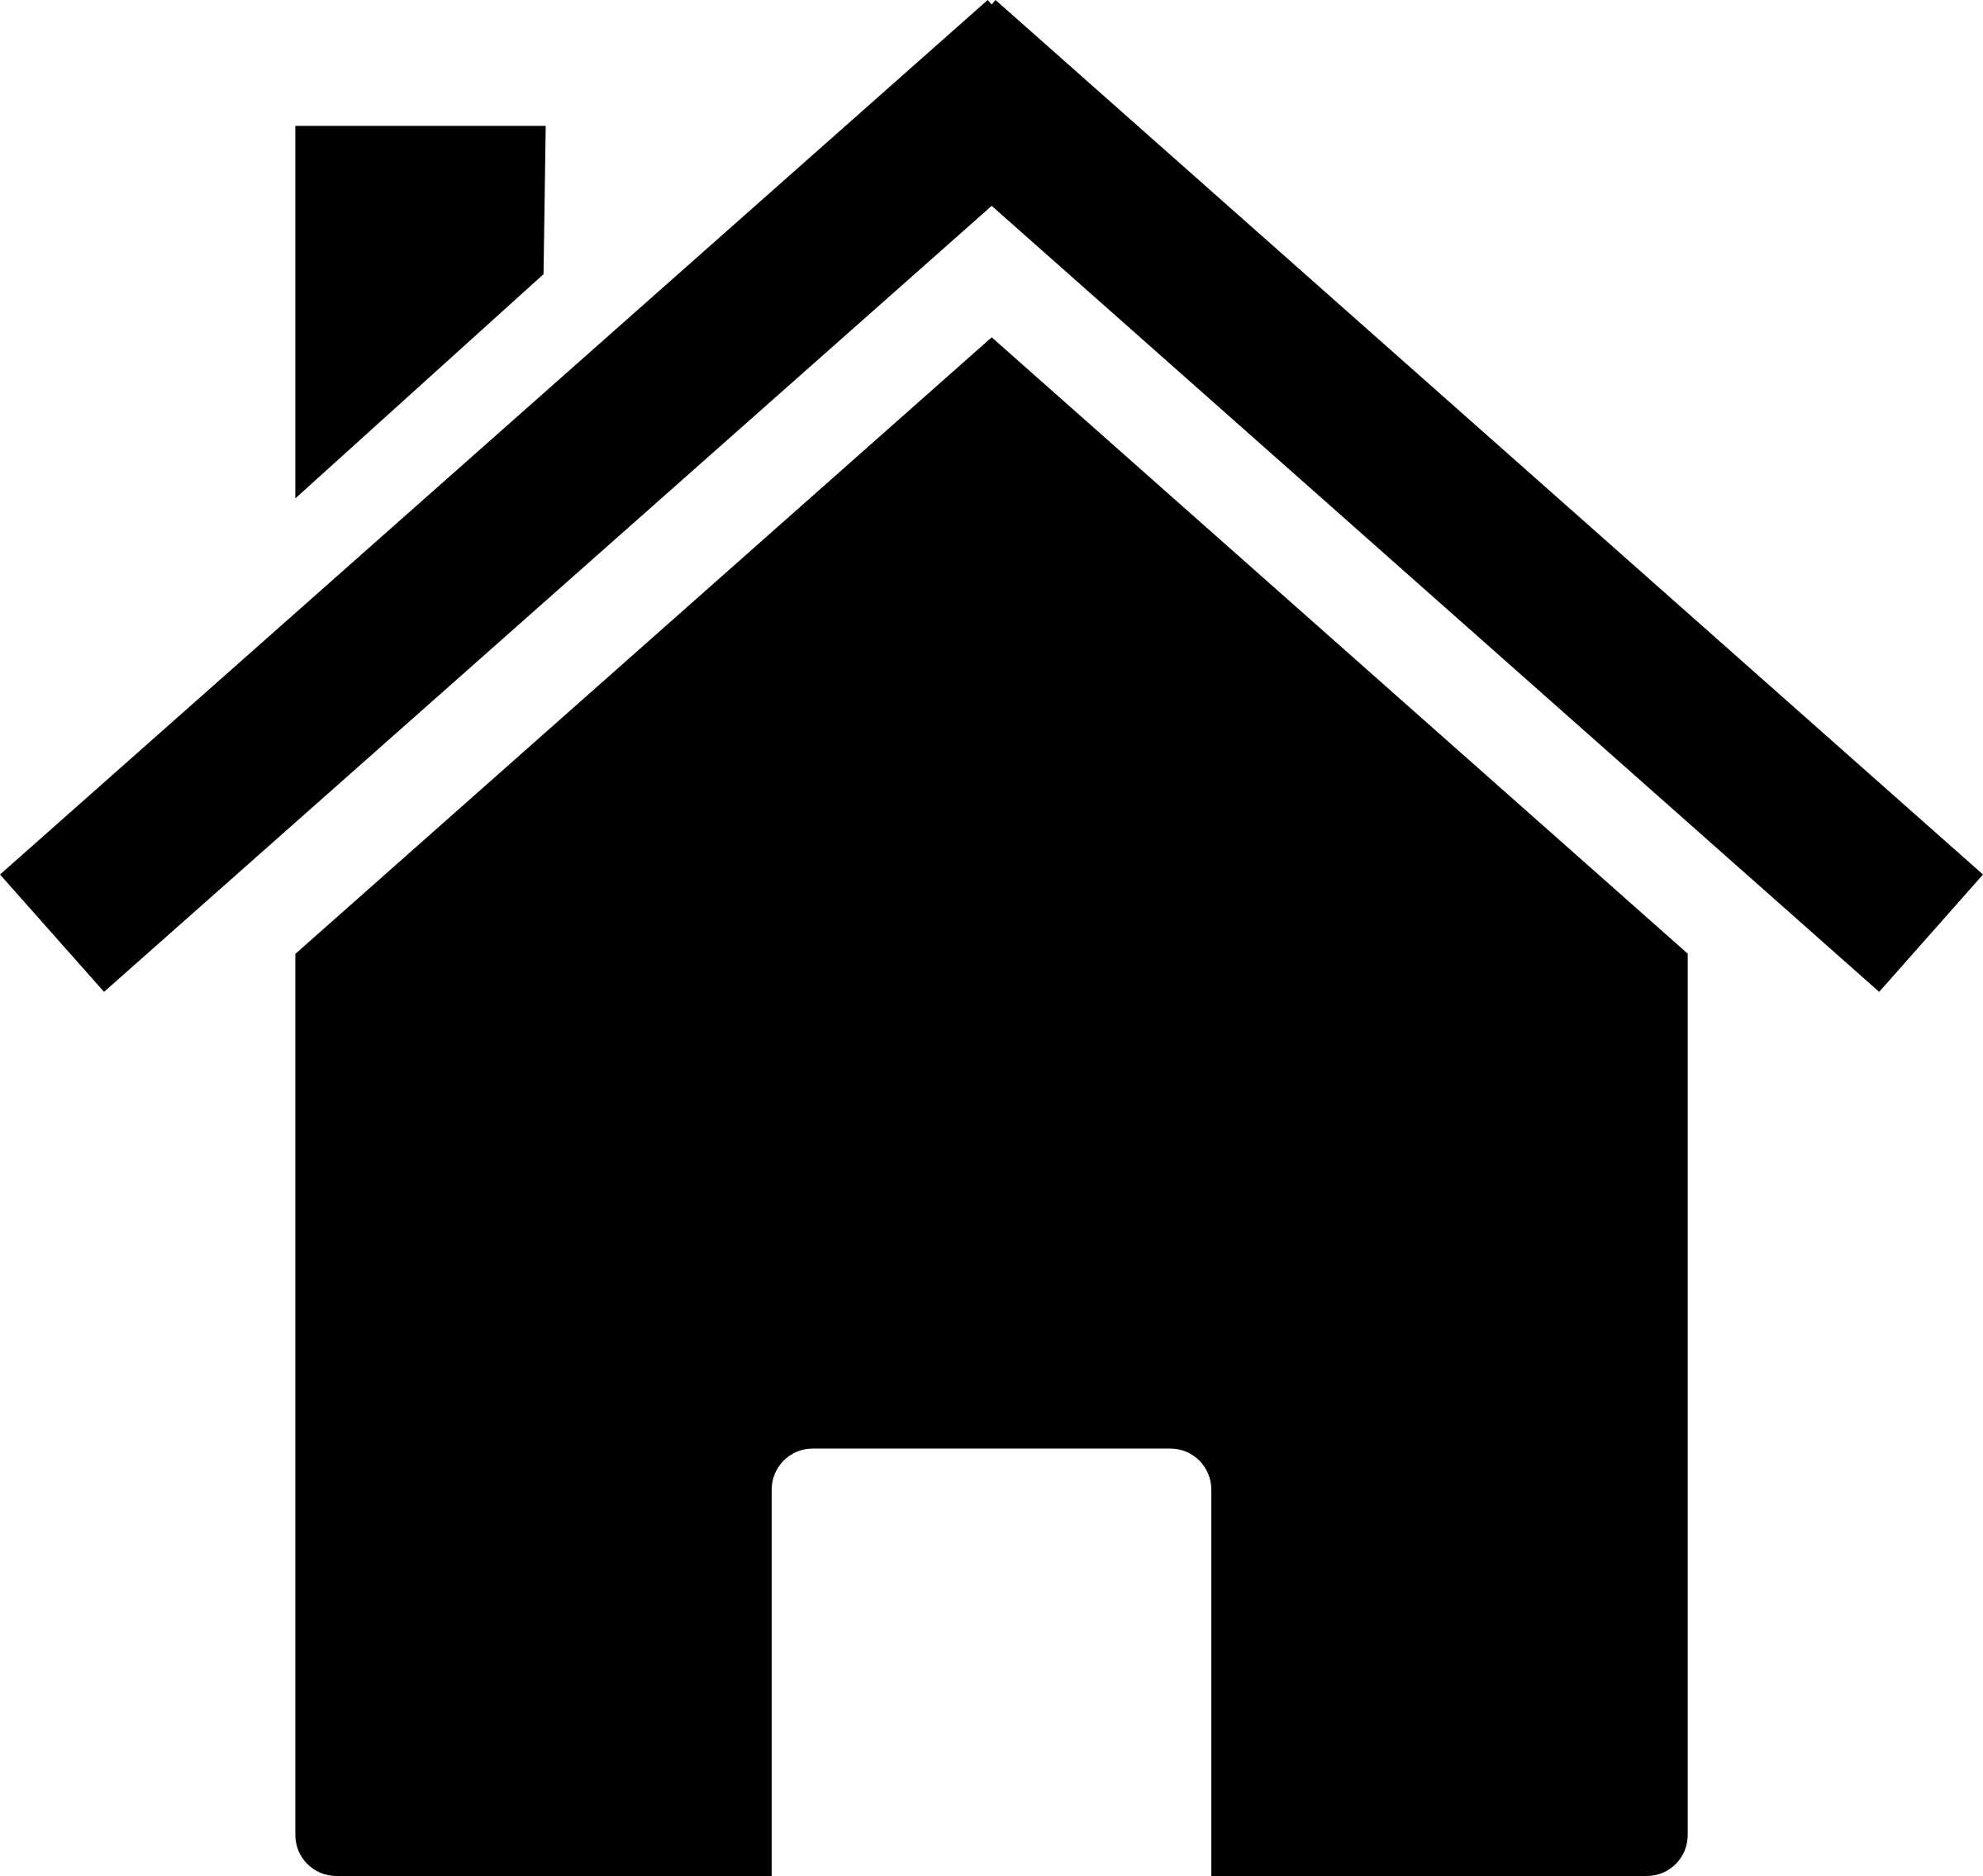 Estate, home, house, real icon | Icon search engine